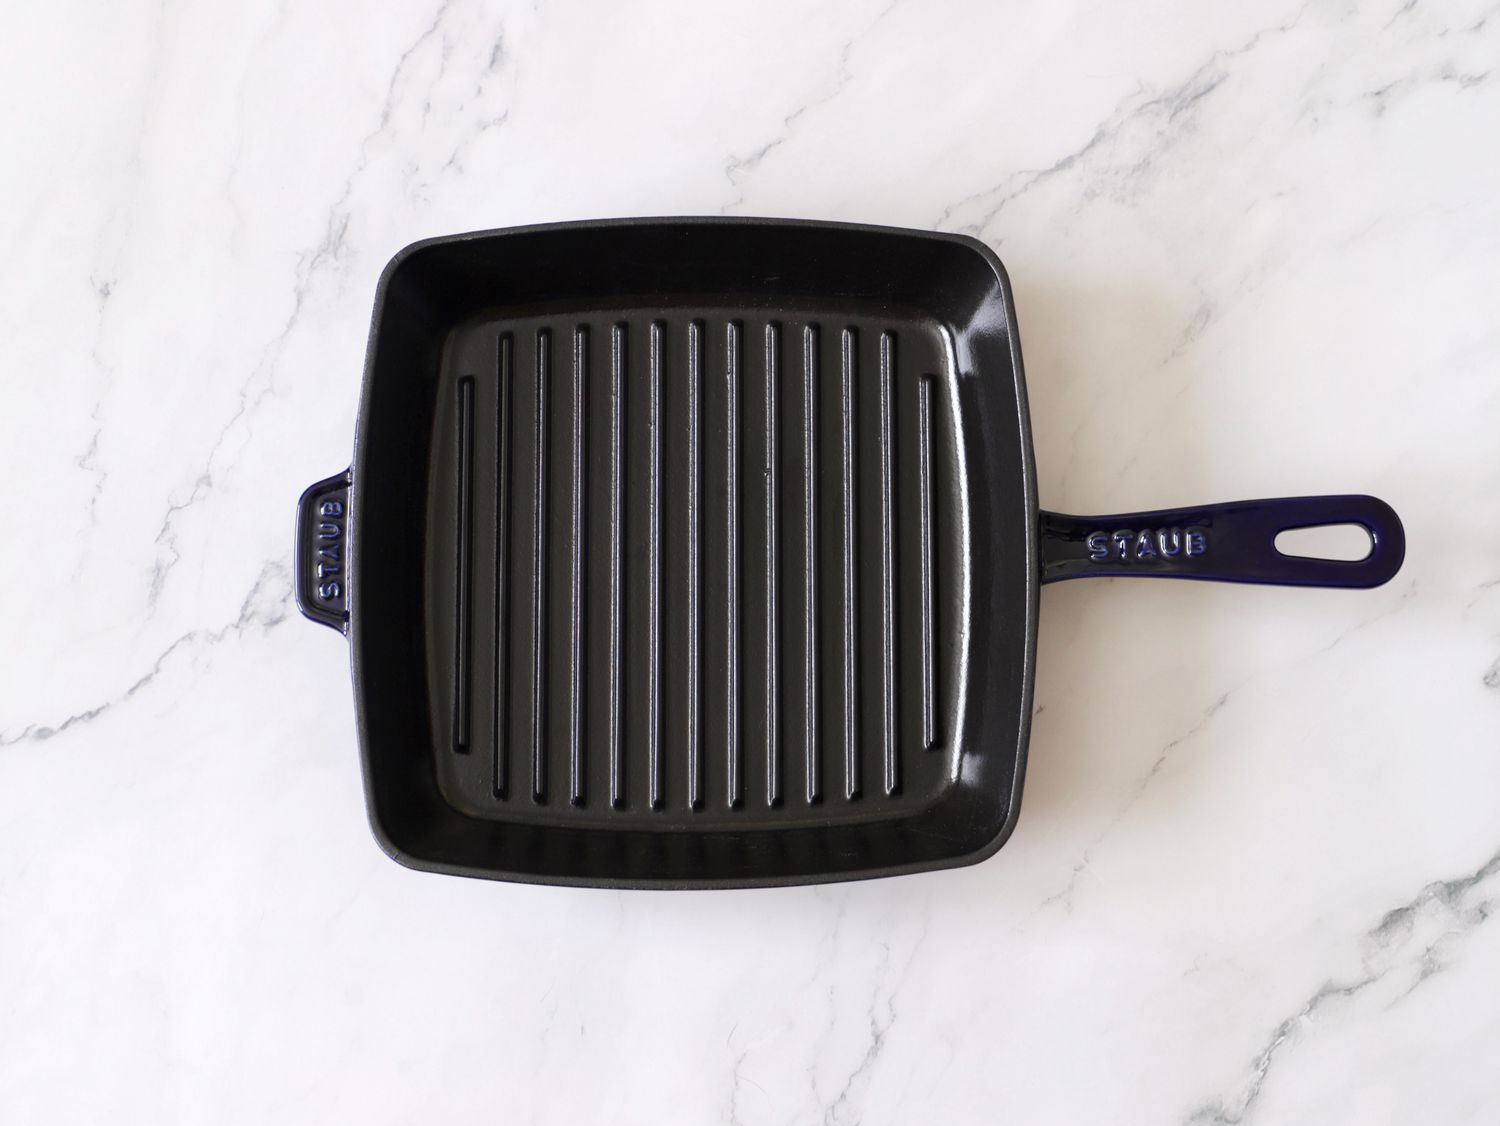 staub grill pan on marble countertop